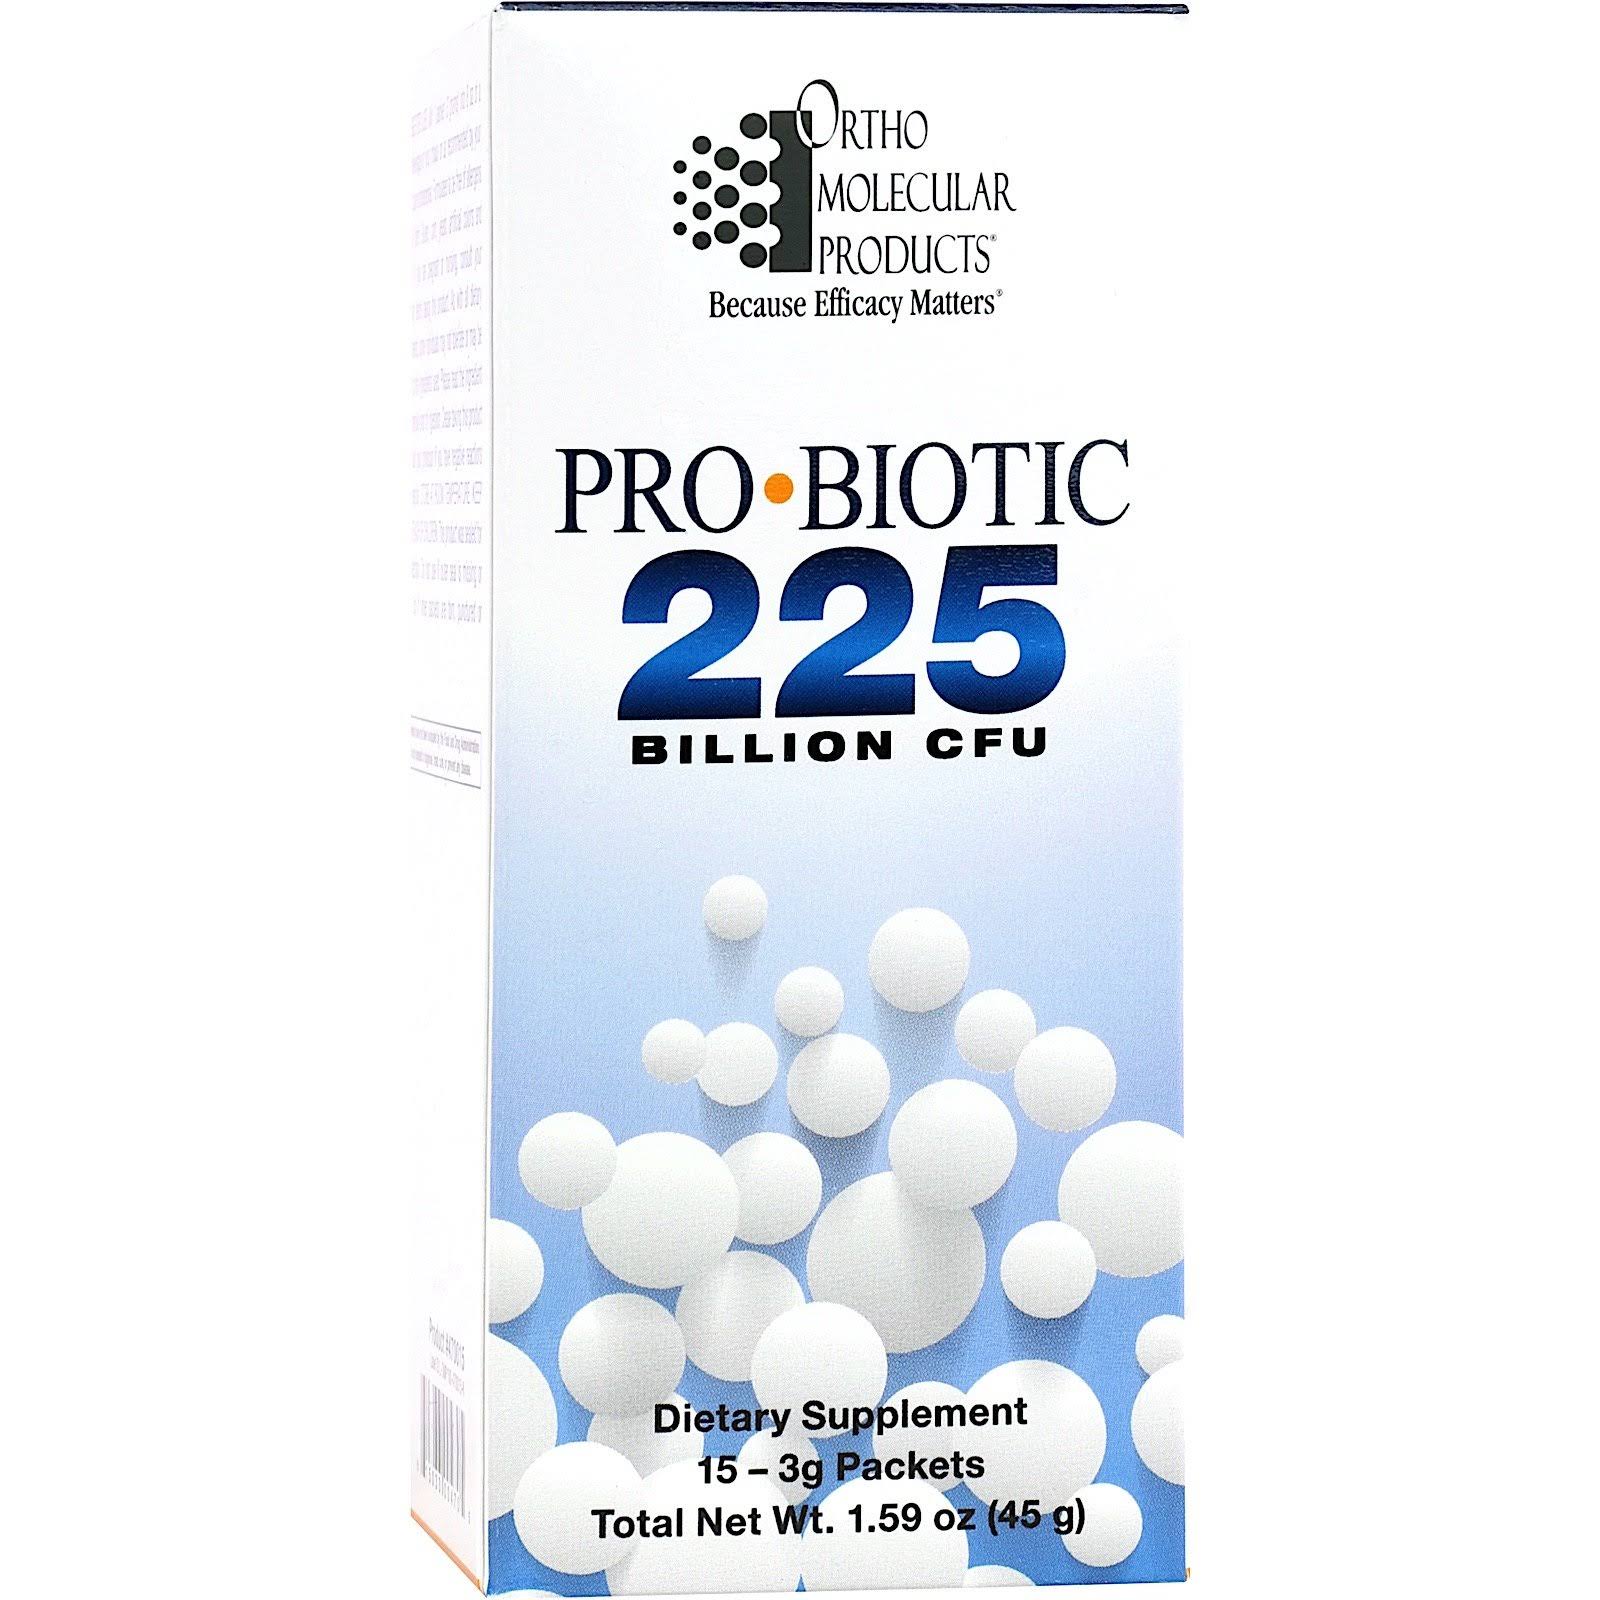 Ortho Molecular Products Probiotic 225 - 15-3g Packets